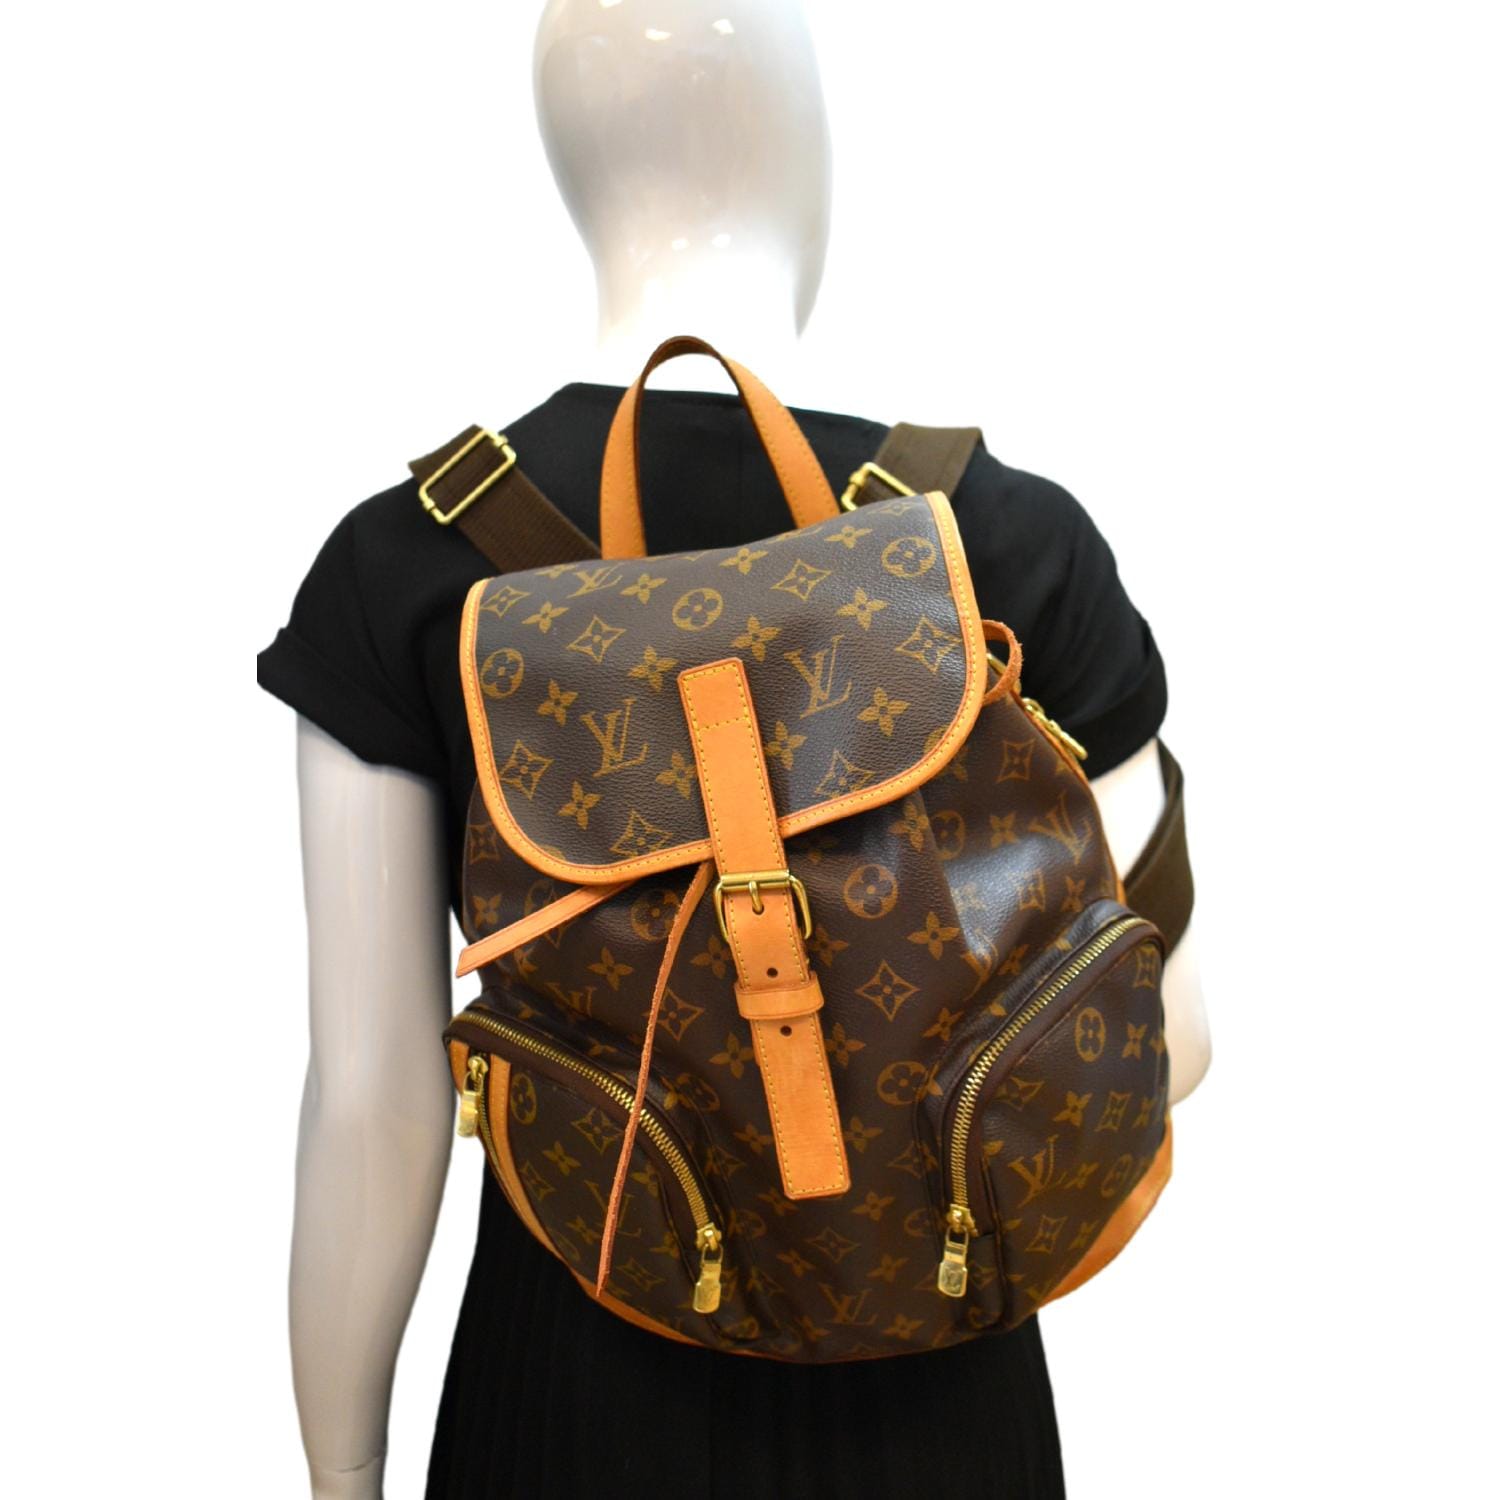 Authentic Louis Vuitton Monogram Bosphore Backpack for Sale in